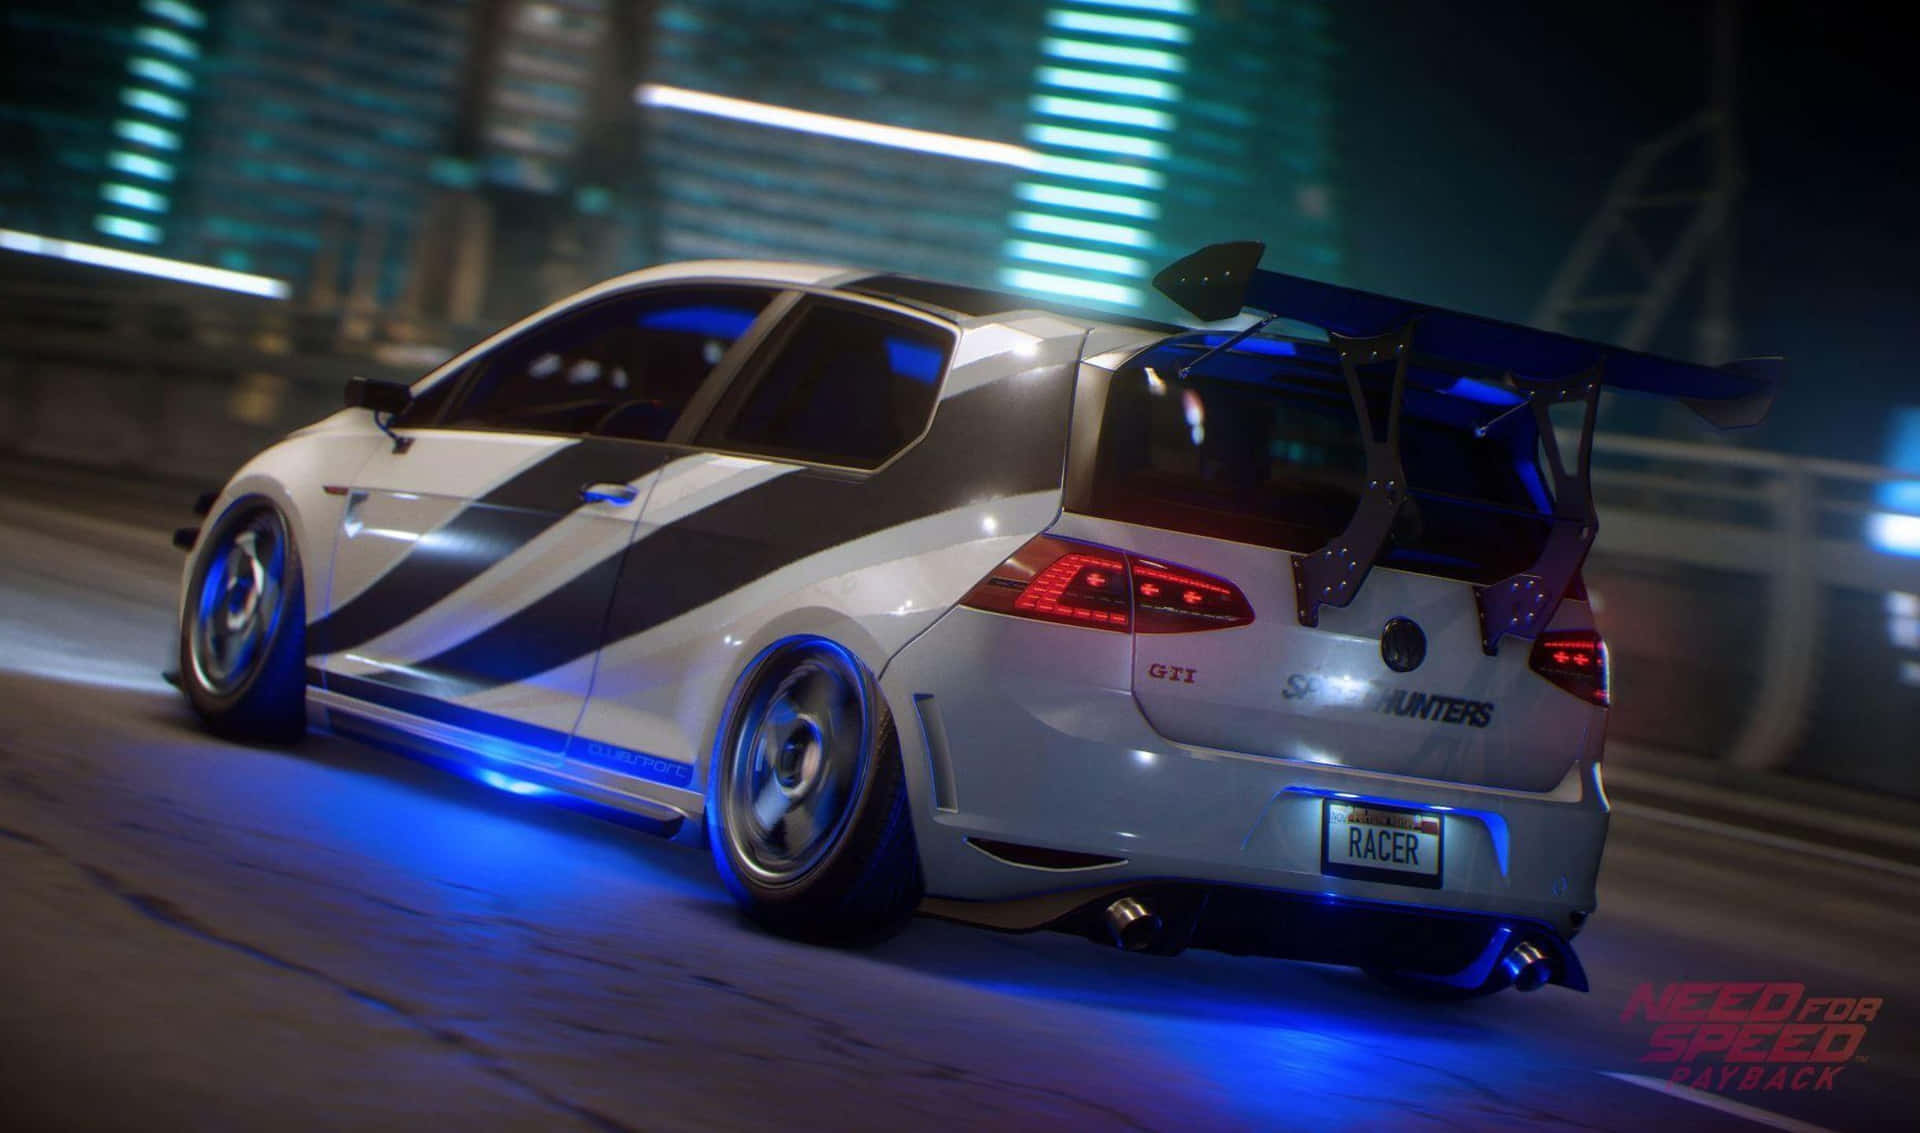 Affrontarapine Alla Hollywood-style Con Need For Speed Payback.